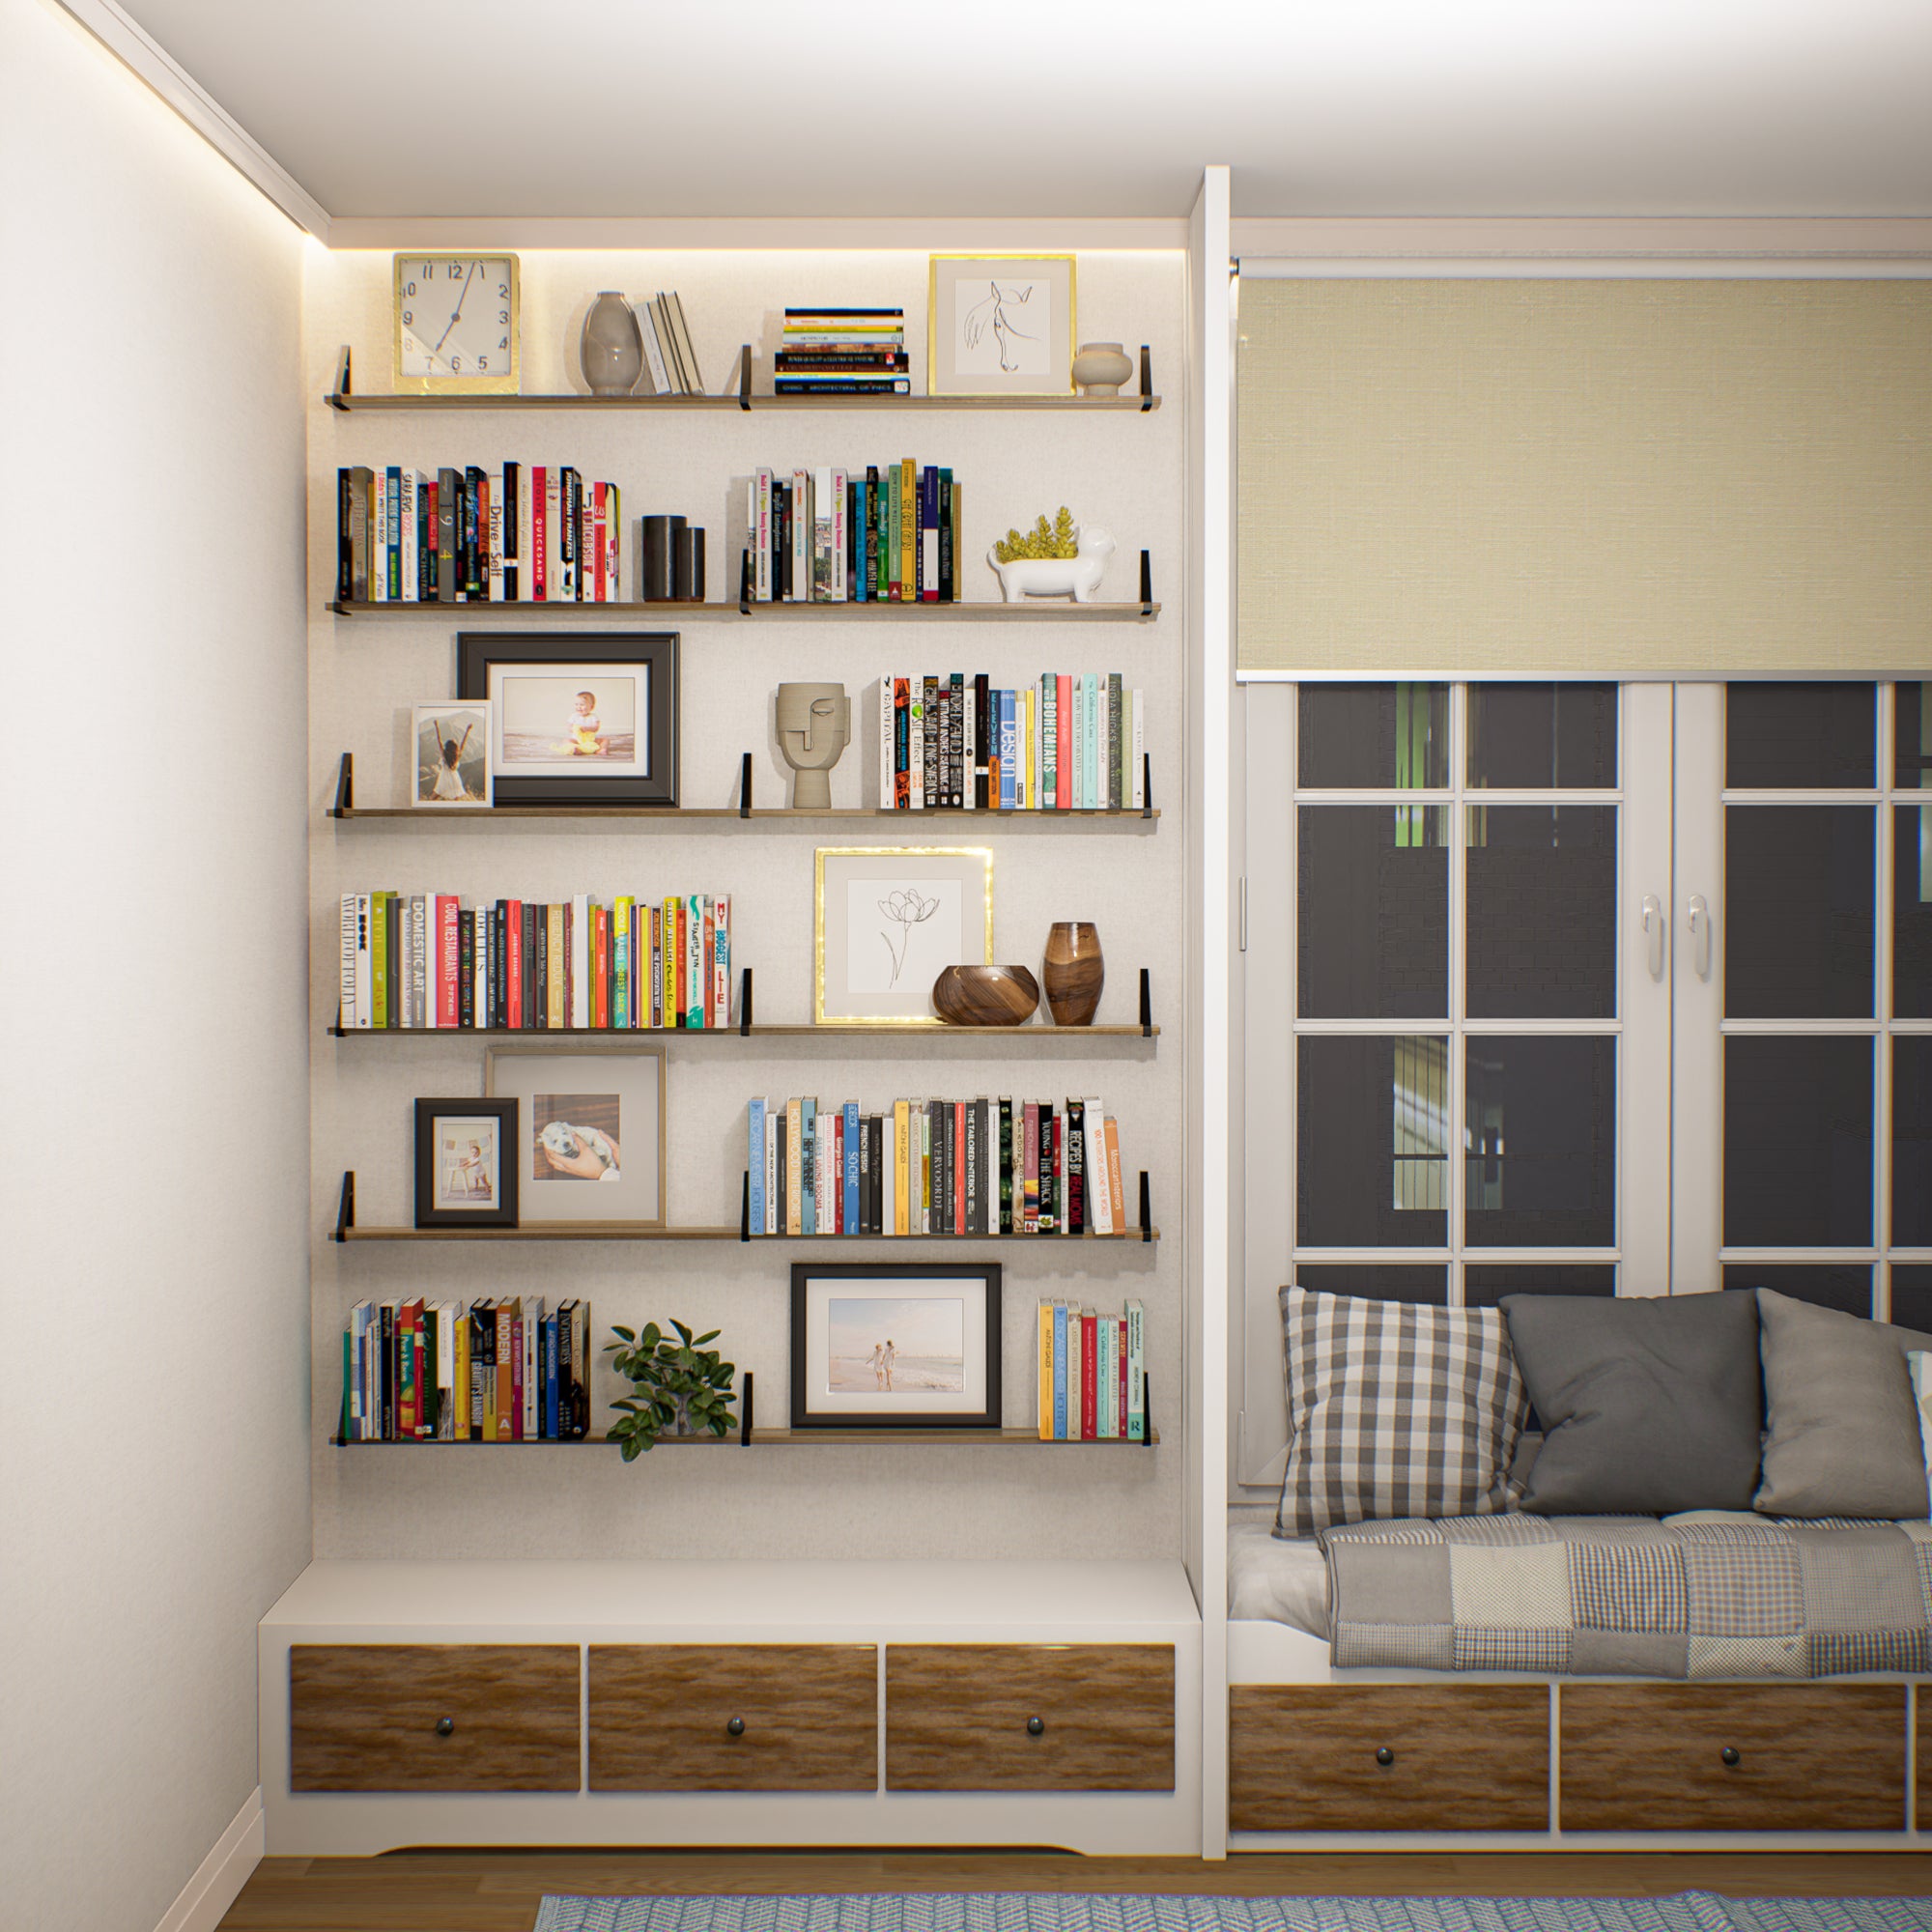 A well-organized shelving unit integrated into a cozy nook with drawers below and a variety of books and decorative items above.